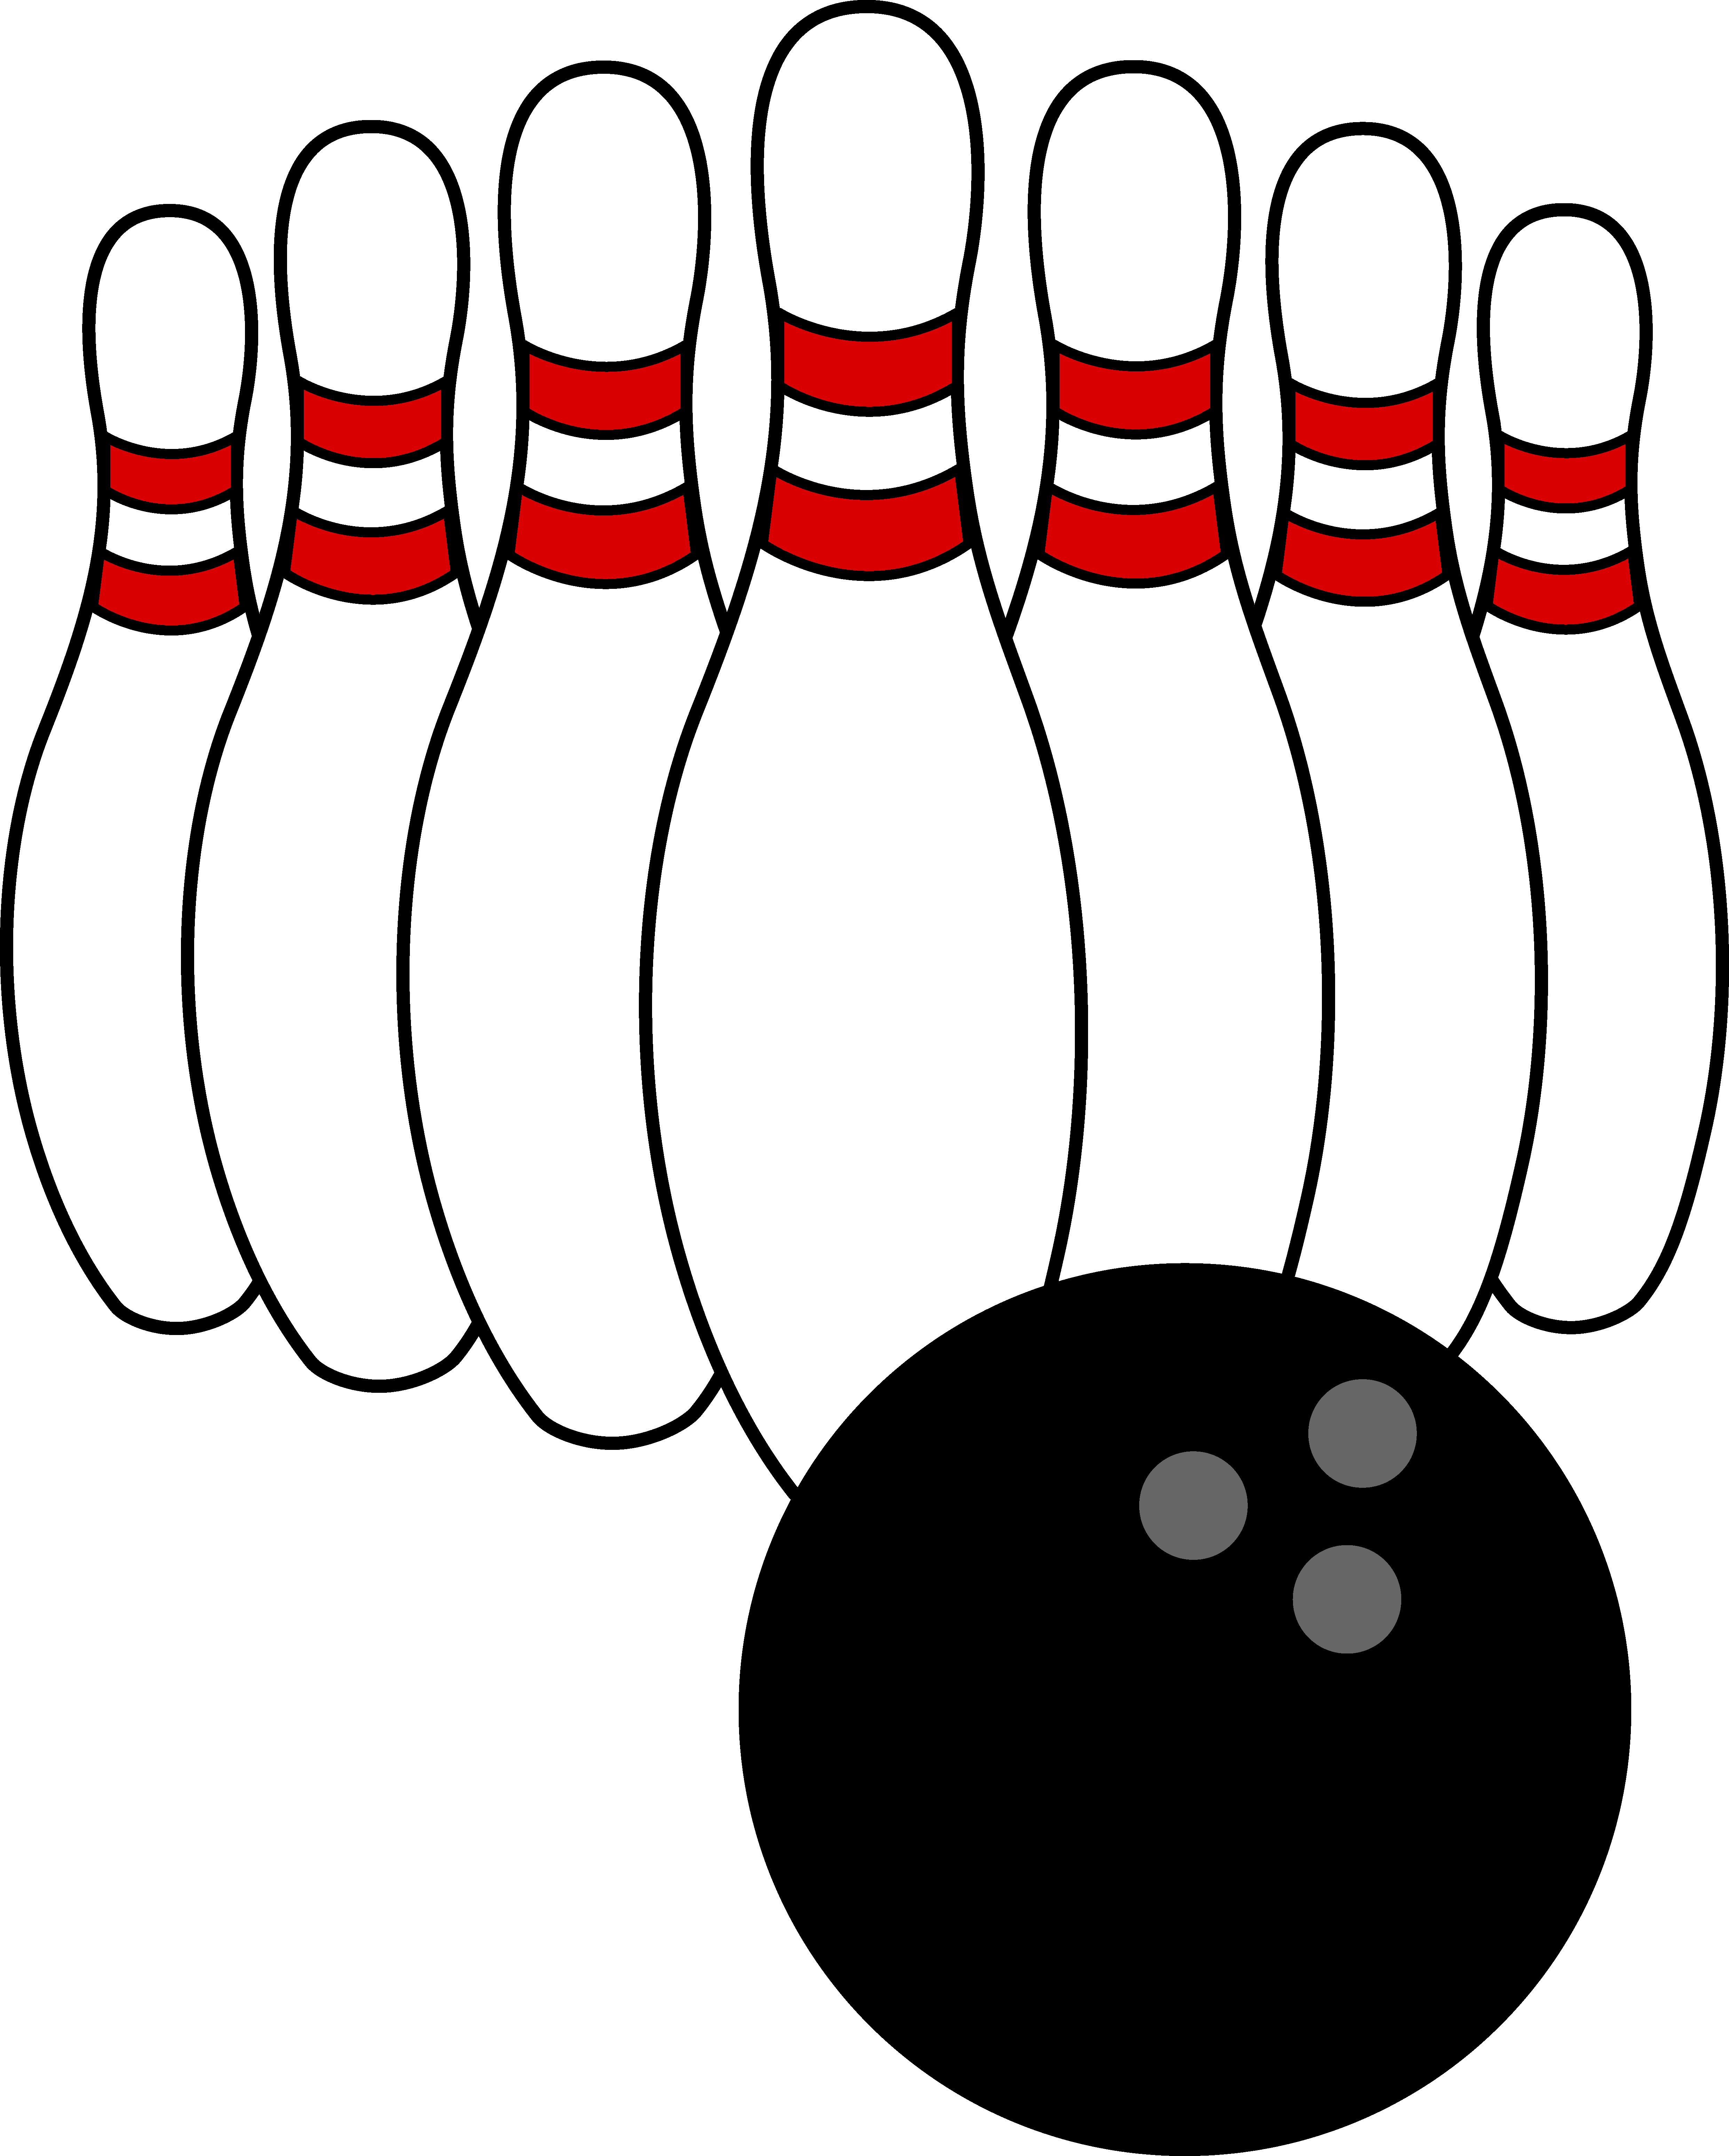 Bowling Ball And Pins Animation - ClipArt Best